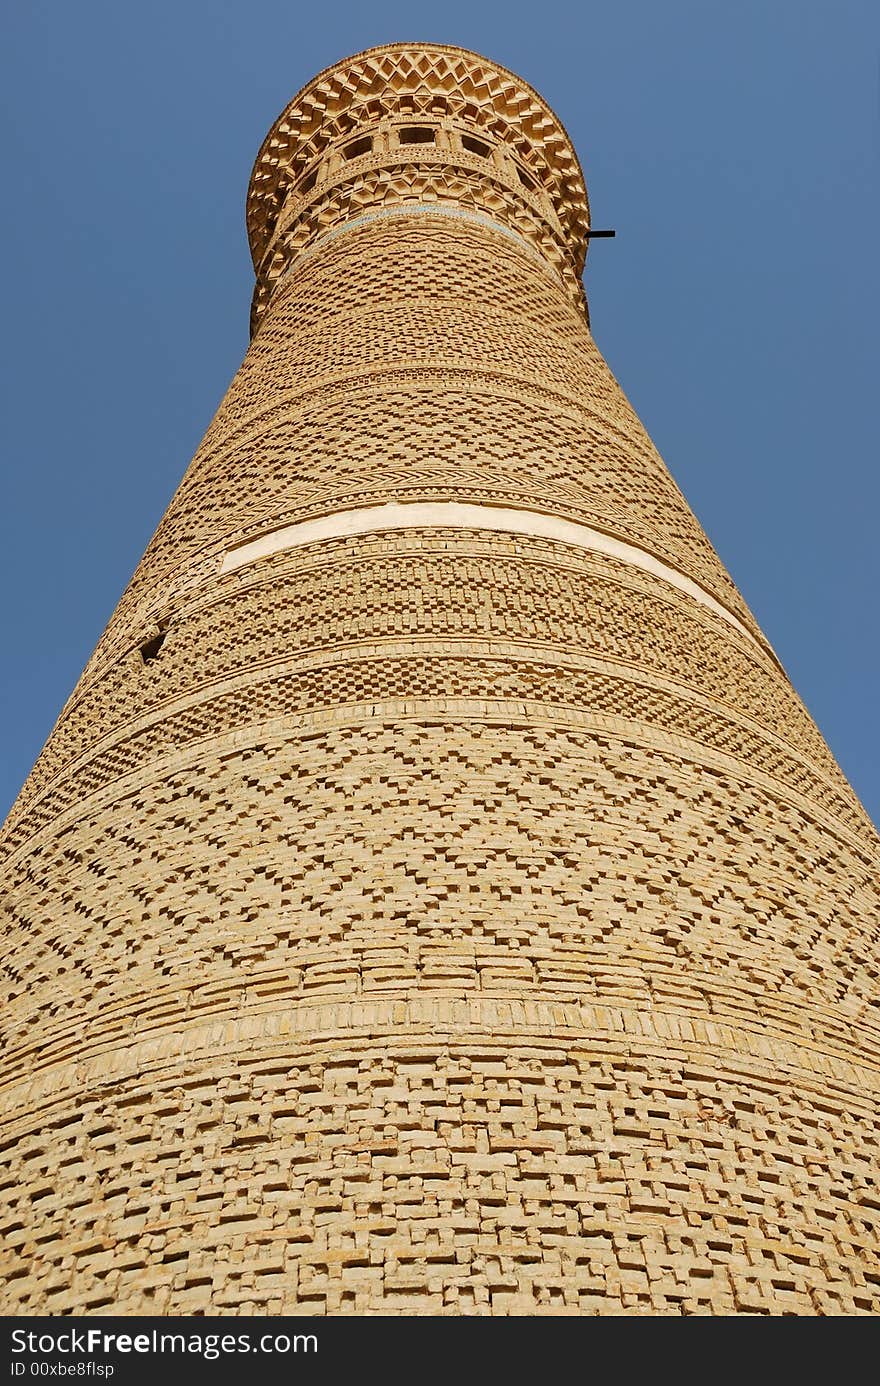 The minaret in moscue Kaljan, the highest in Bukhara, Uzbekistan. The minaret in moscue Kaljan, the highest in Bukhara, Uzbekistan